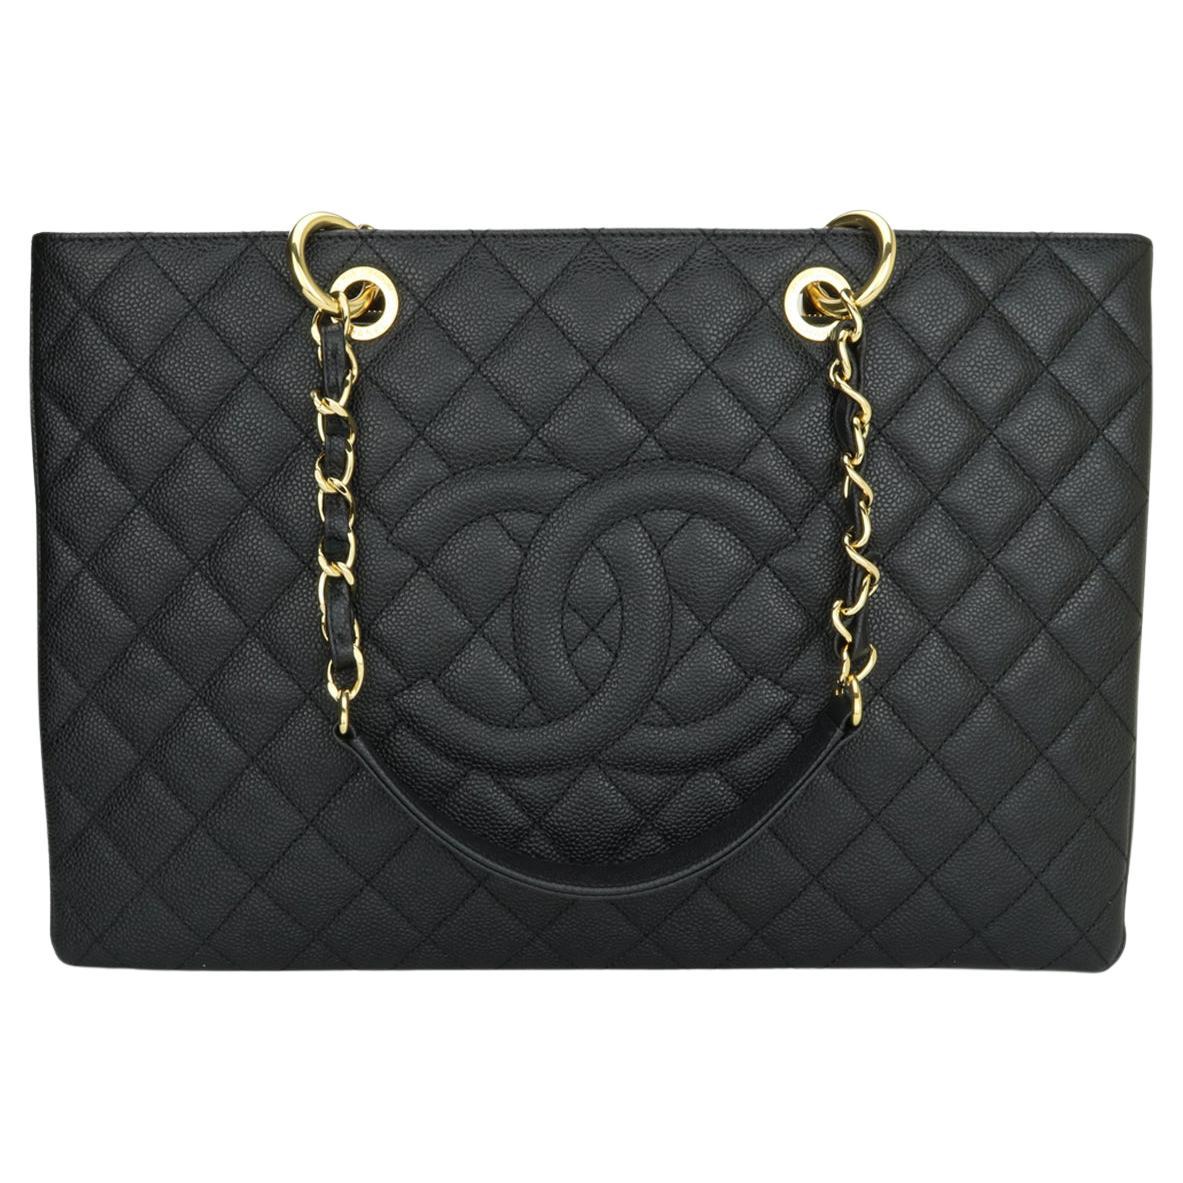 CHANEL Grand Shopping Tote (GST) XL Bag Black Caviar with Gold Hardware 2012